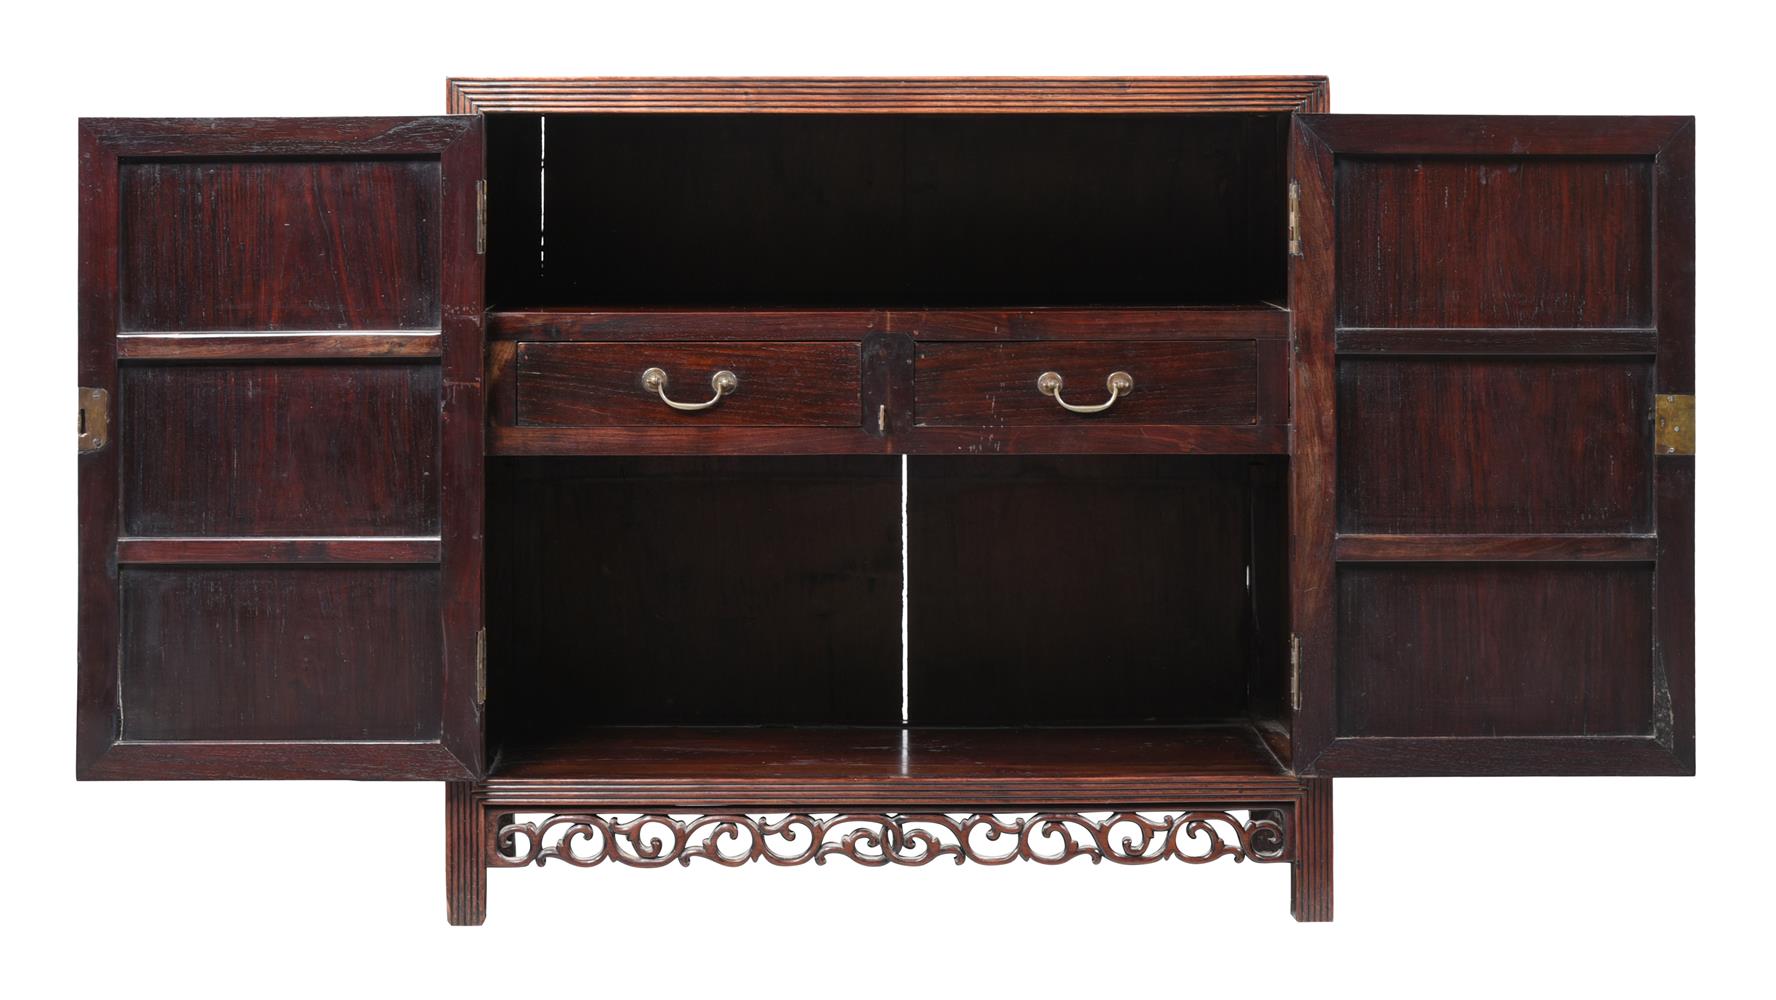 A CHINESE EXPORT HARDWOOD CABINET, SECOND HALF 19TH CENTURY - Image 3 of 3